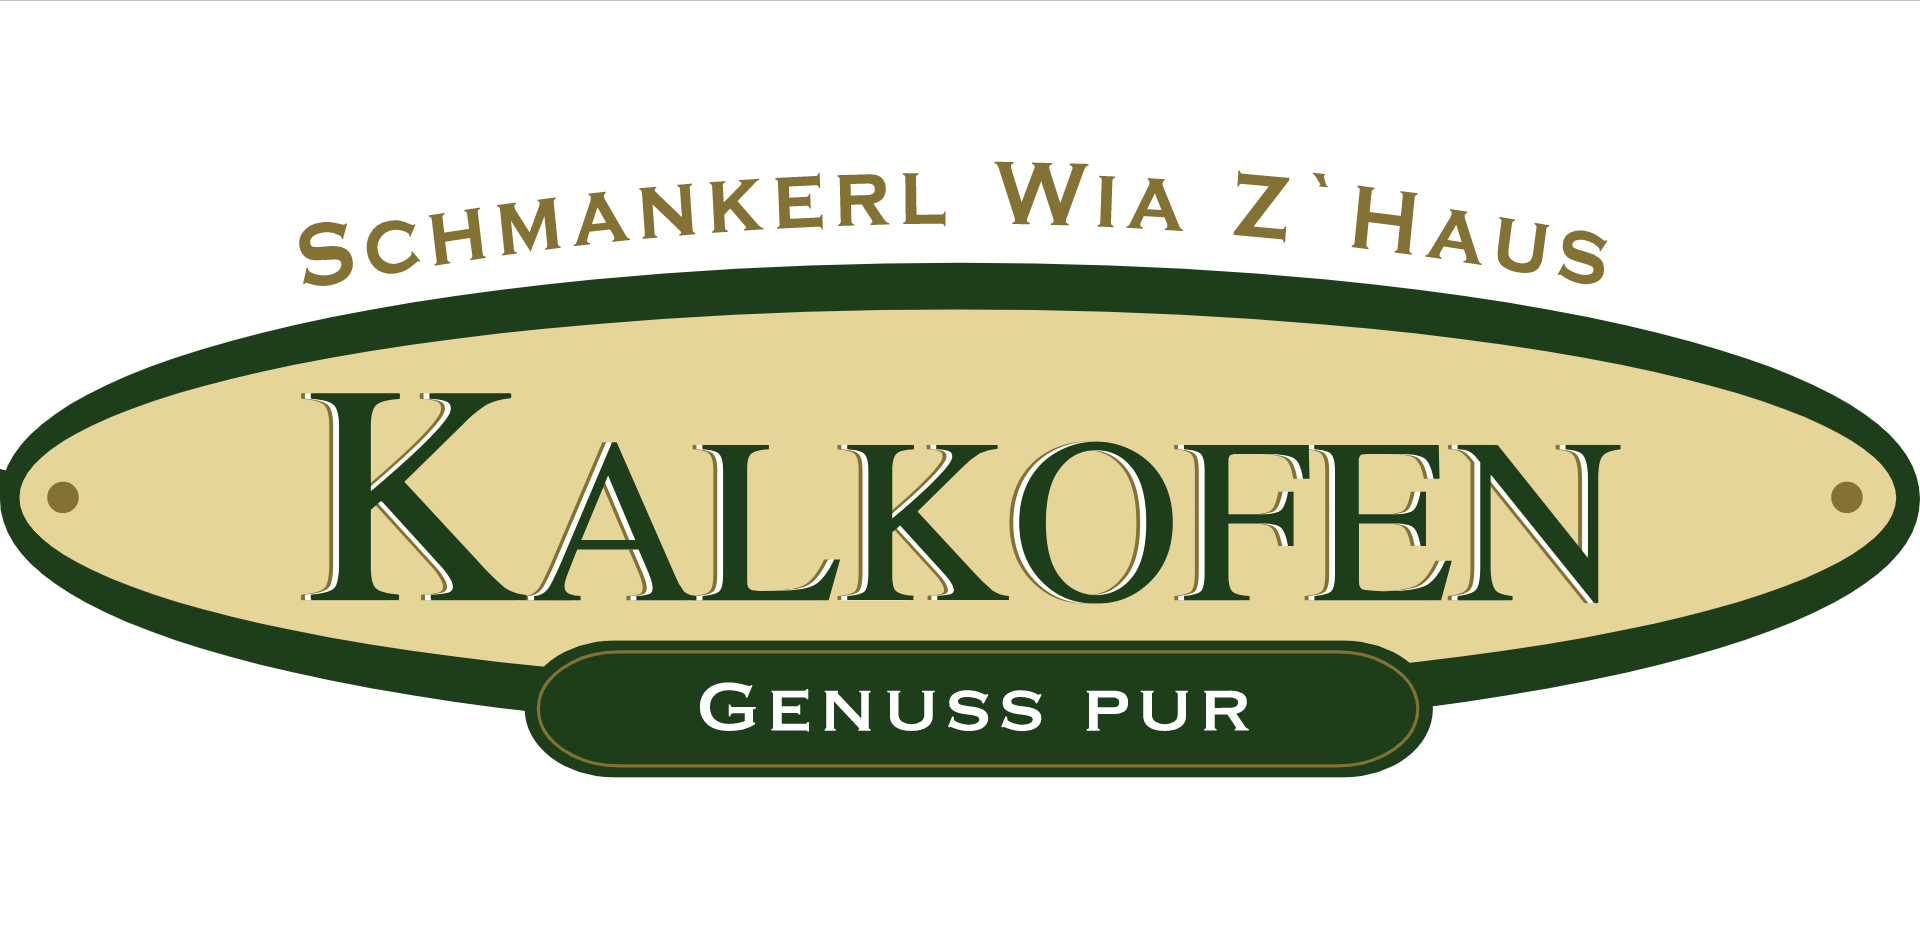 You are currently viewing Schmankerl Wia Z’Haus Kalkofen